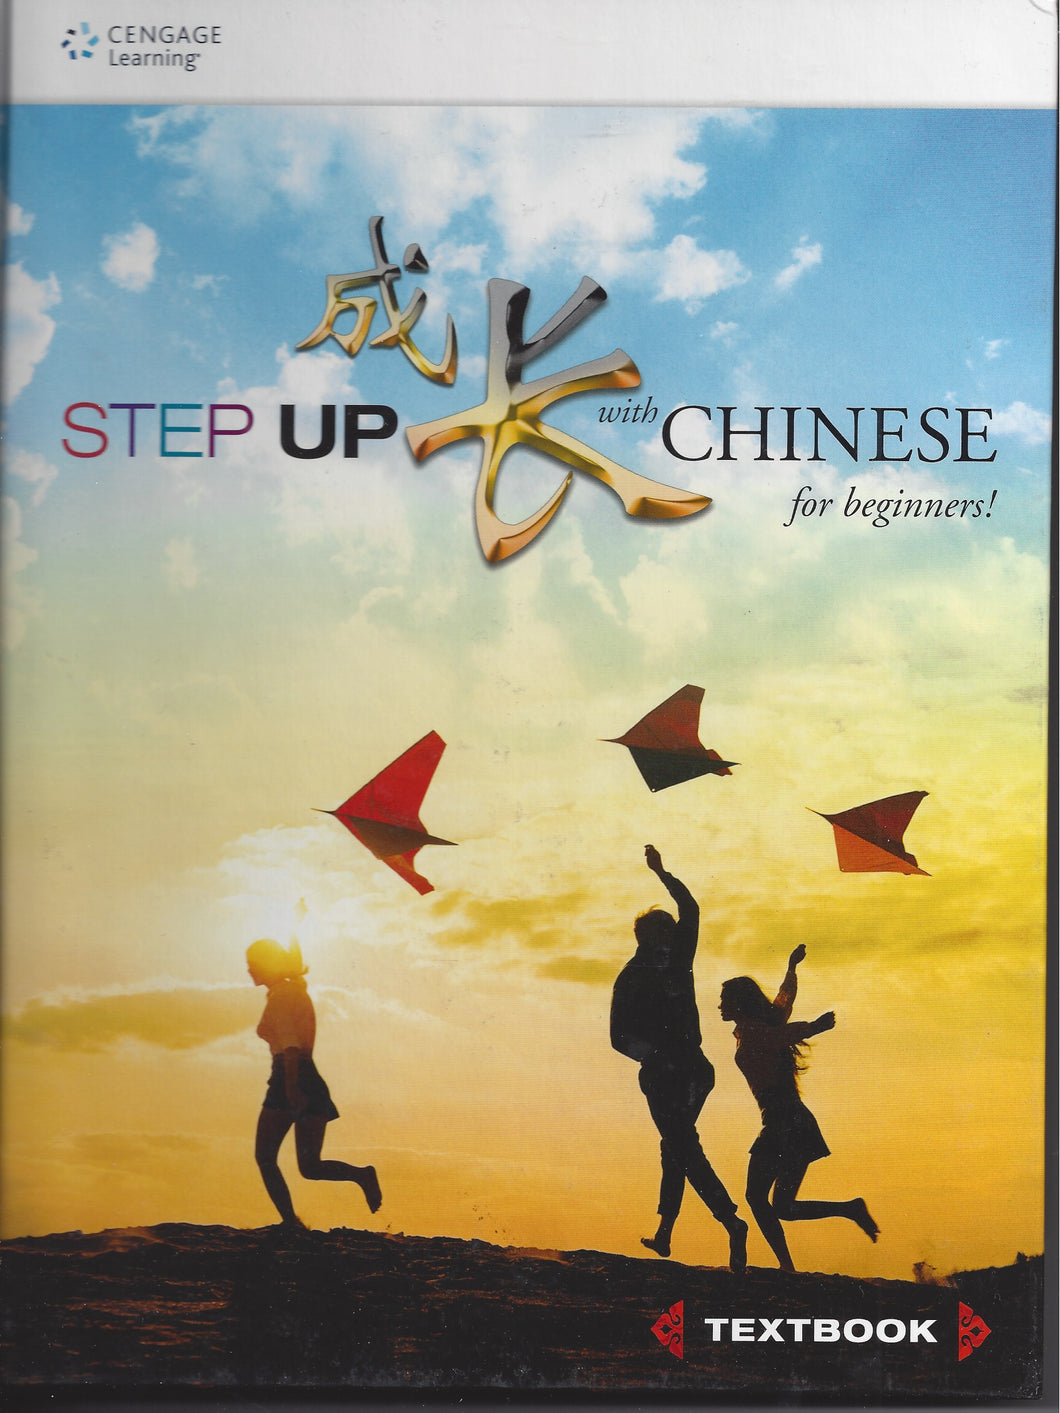 Step Up With Chinese for Beginners ／Textbook 成長